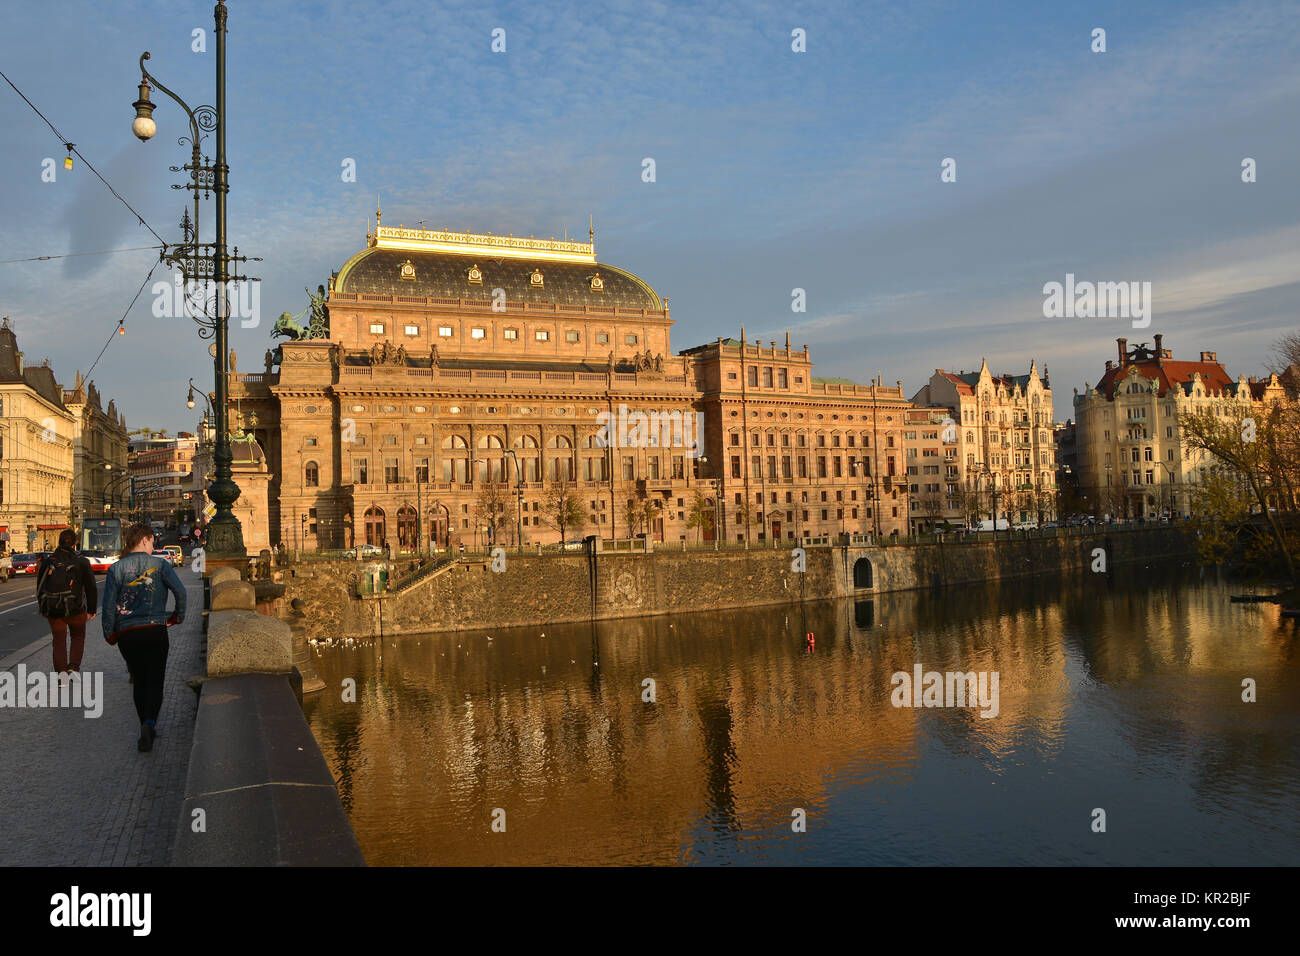 National Theater in Prague. The Vltava embankment in the capital of the Czech Republic. Stock Photo